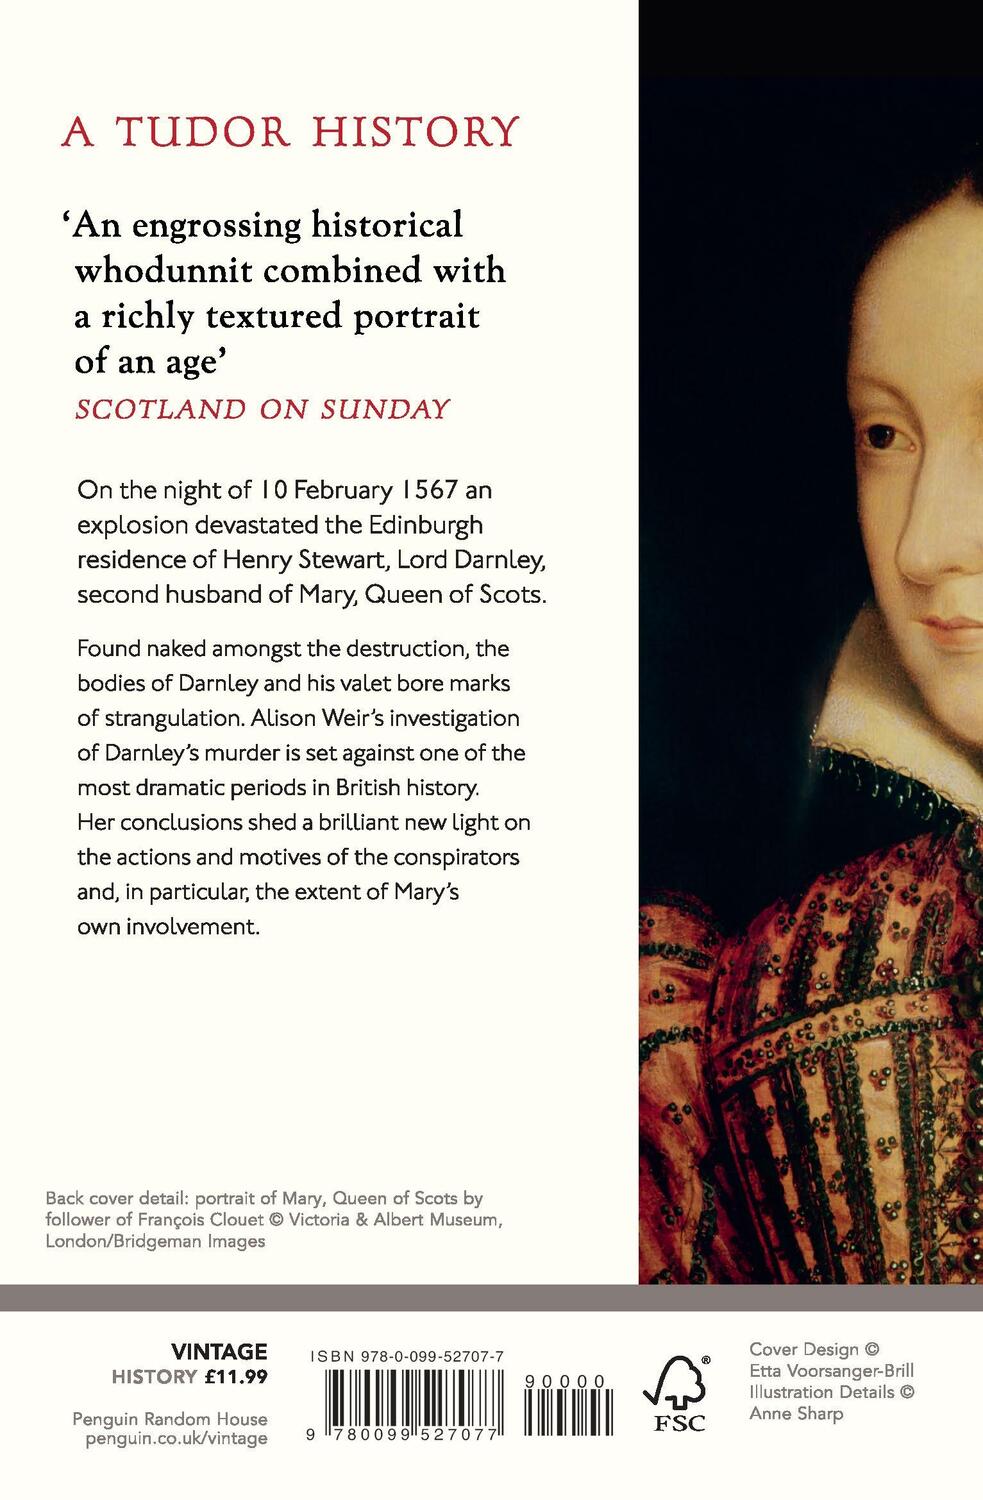 Rückseite: 9780099527077 | Mary Queen of Scots | And the Murder of Lord Darnley | Alison Weir